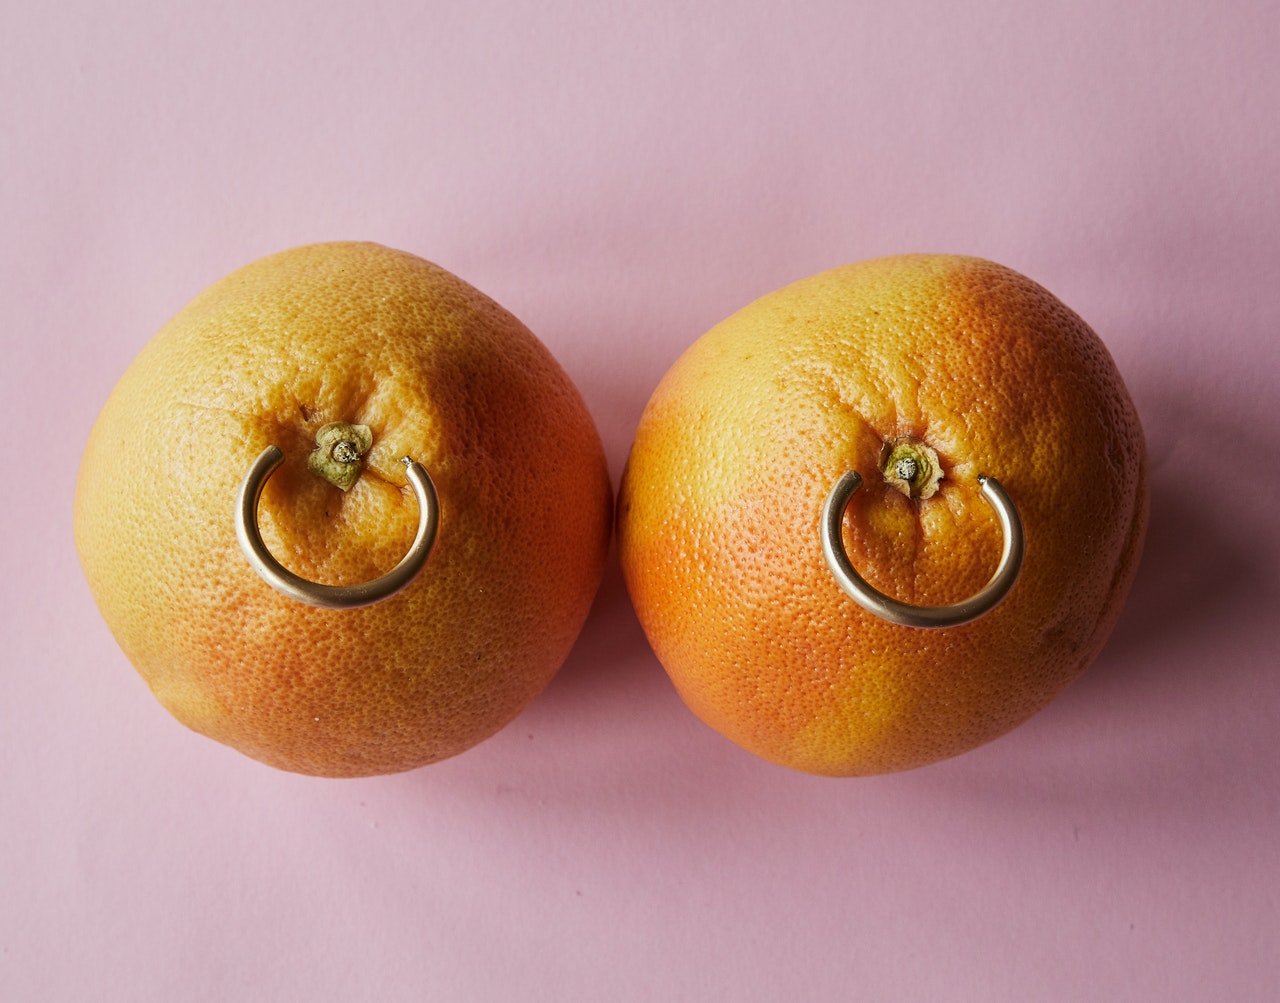 Two oranges with pircing